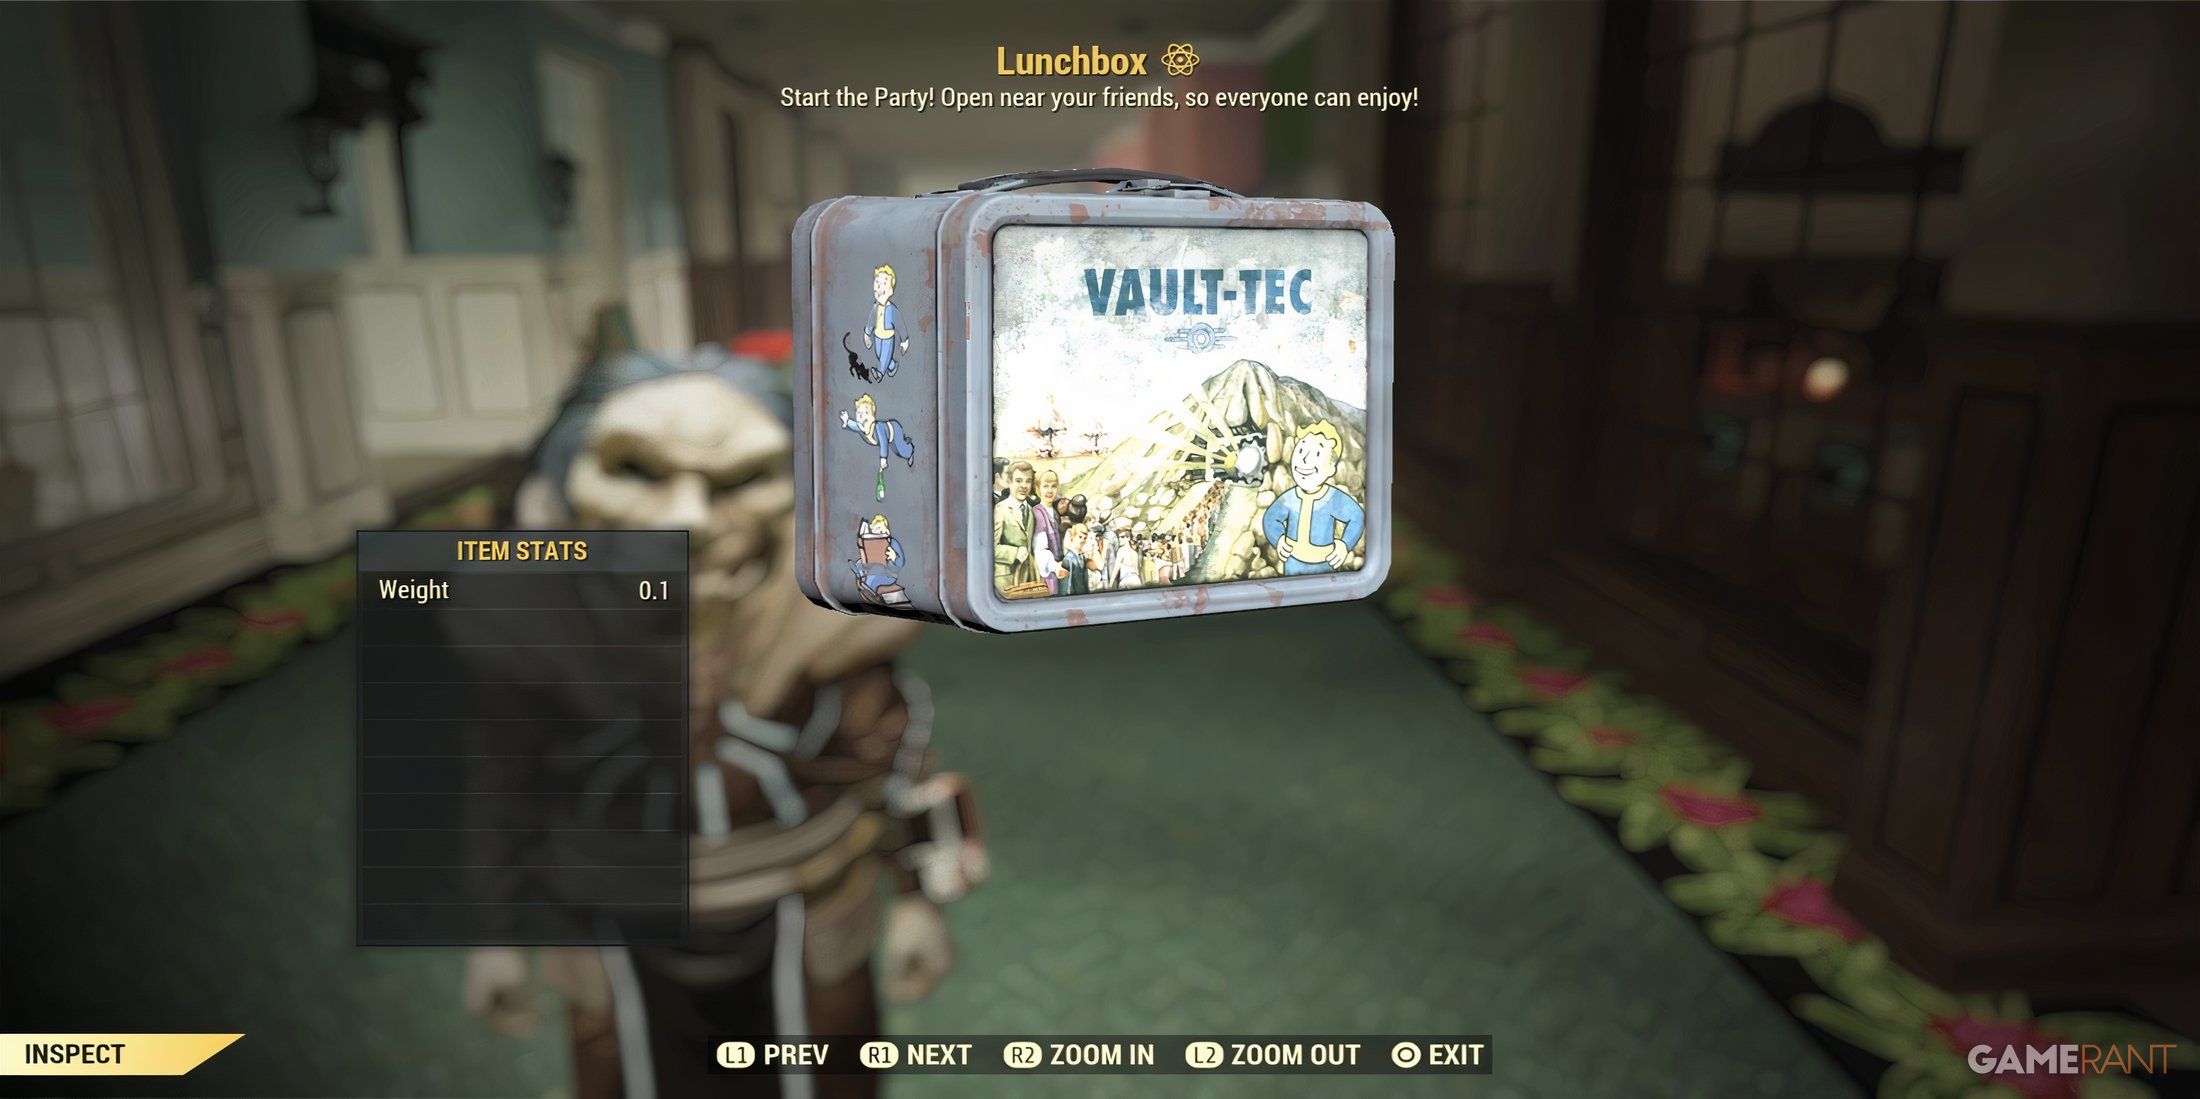 A Lunchbox in Fallout 76